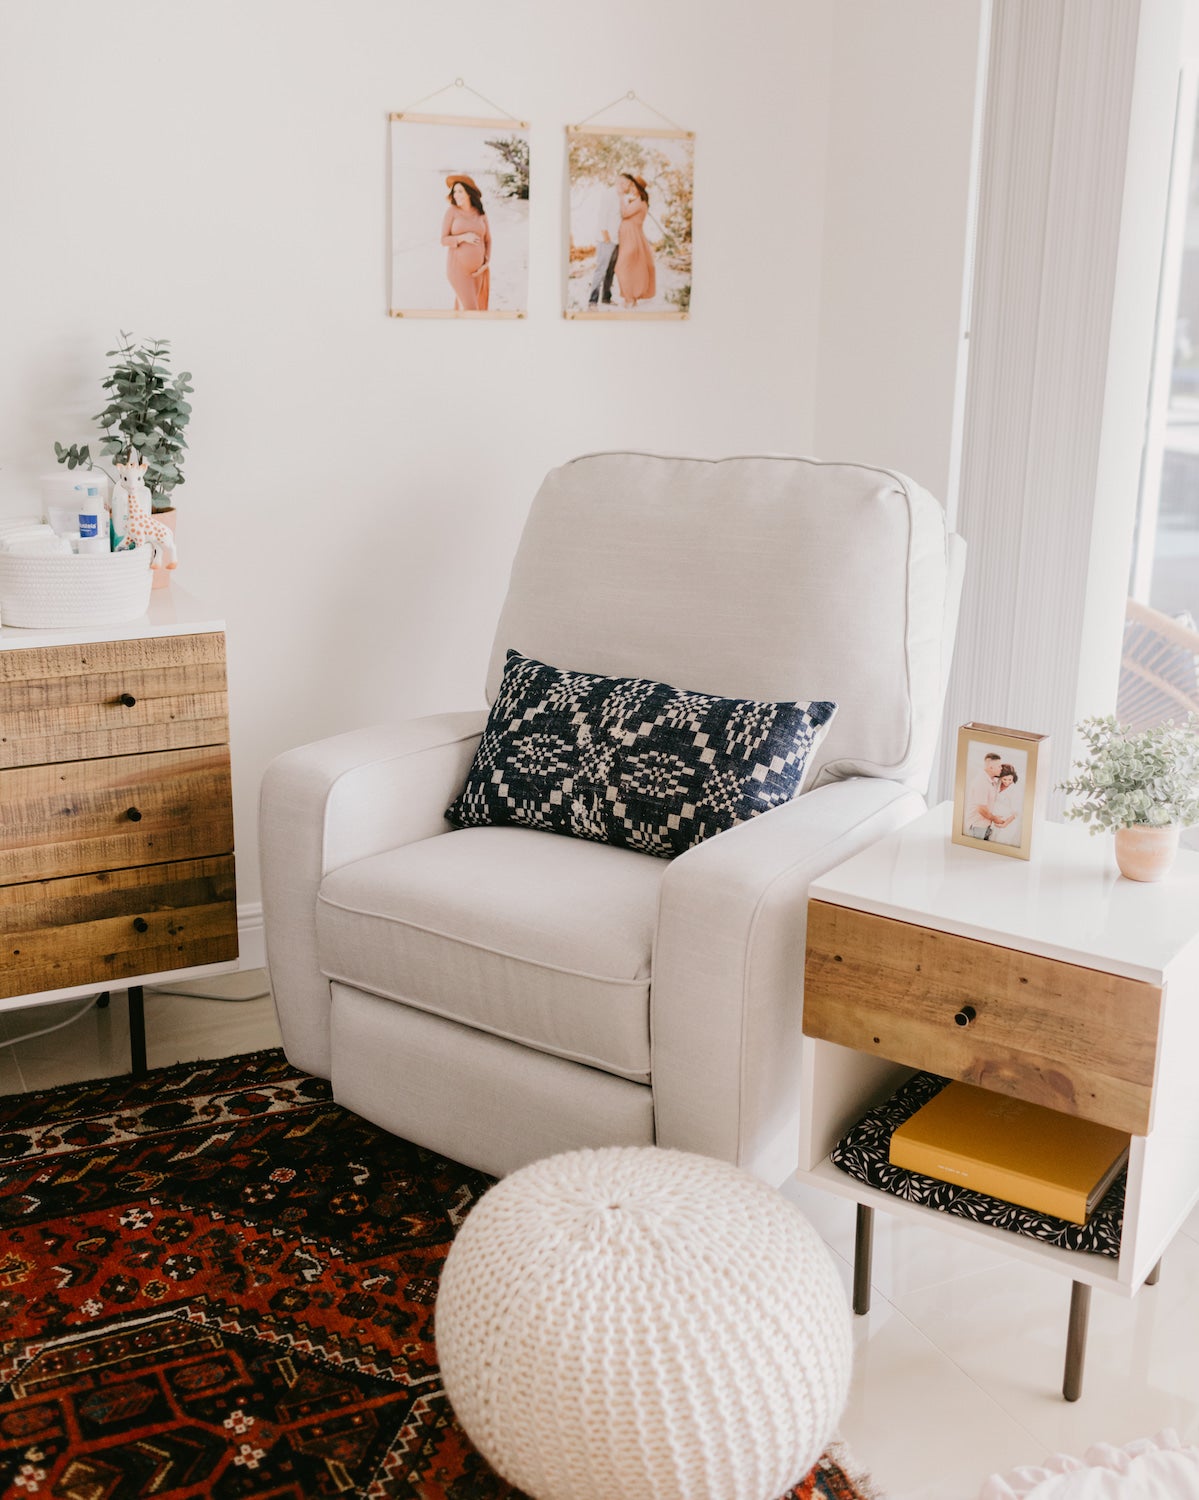 Couch, side table, and pouf with nursery wall decor in background